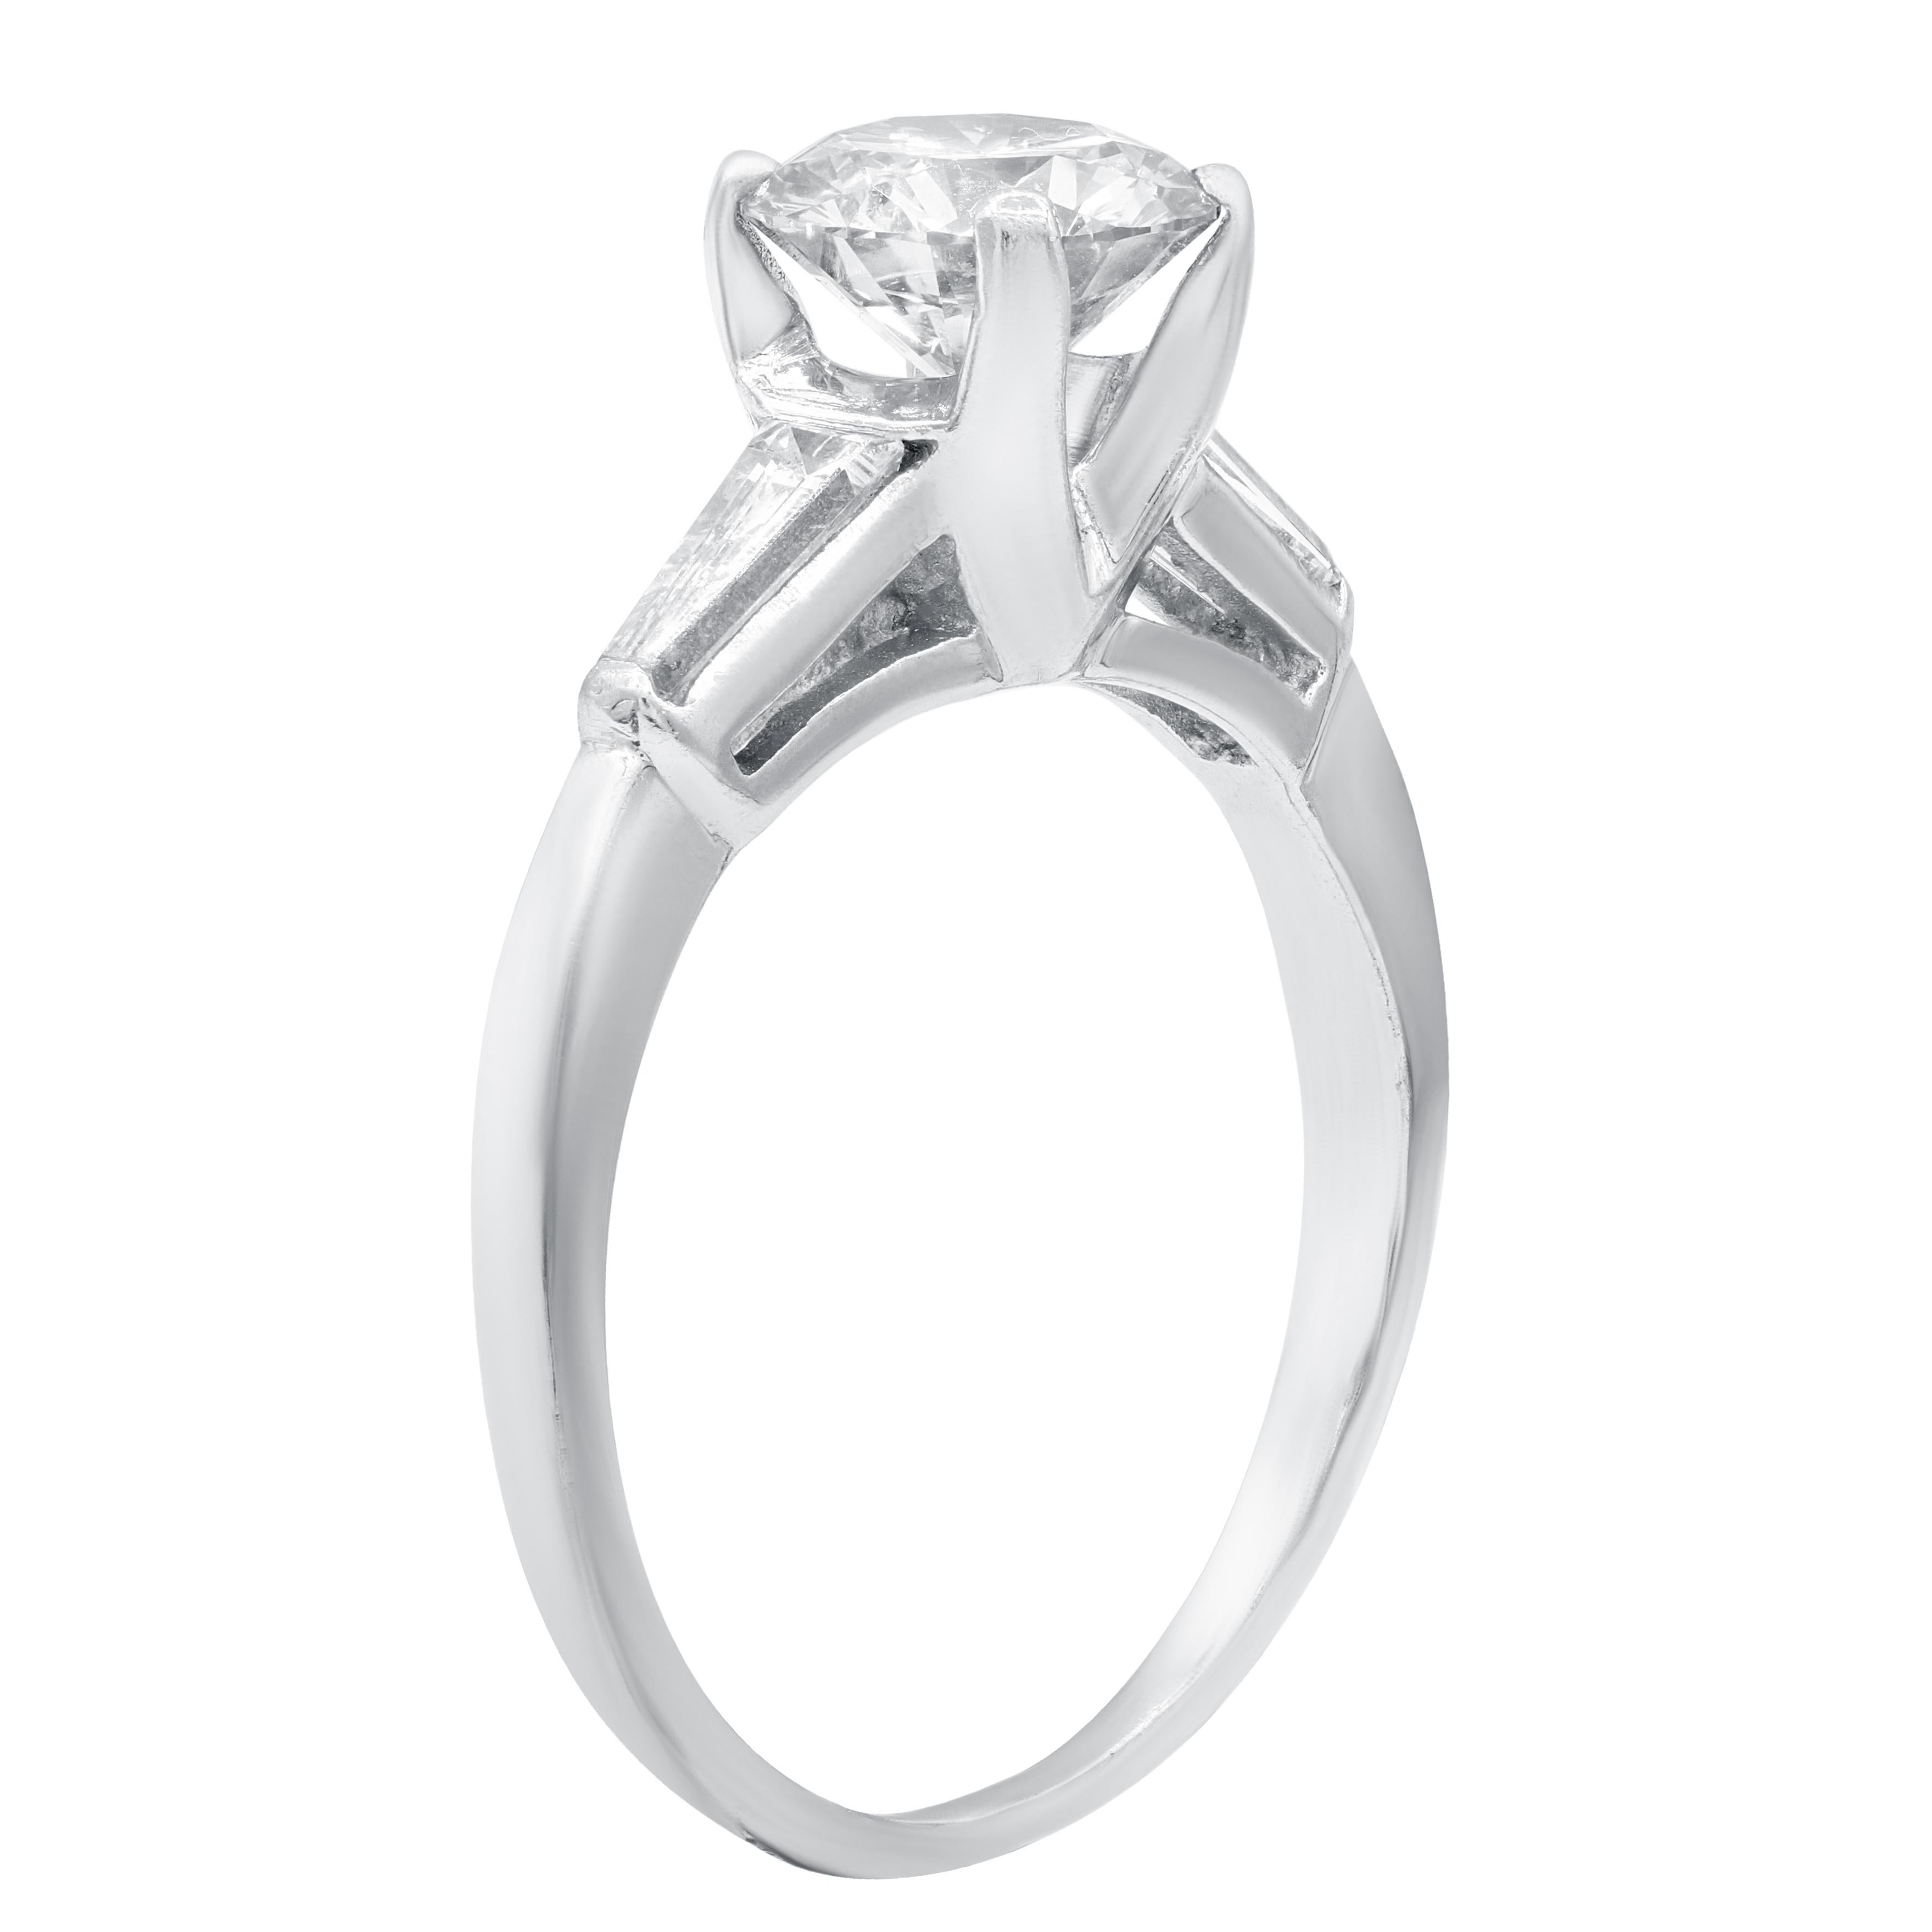 Platinum engagement ring features 1.03 carat of round diamond and .20 ct baguette on the sides.
